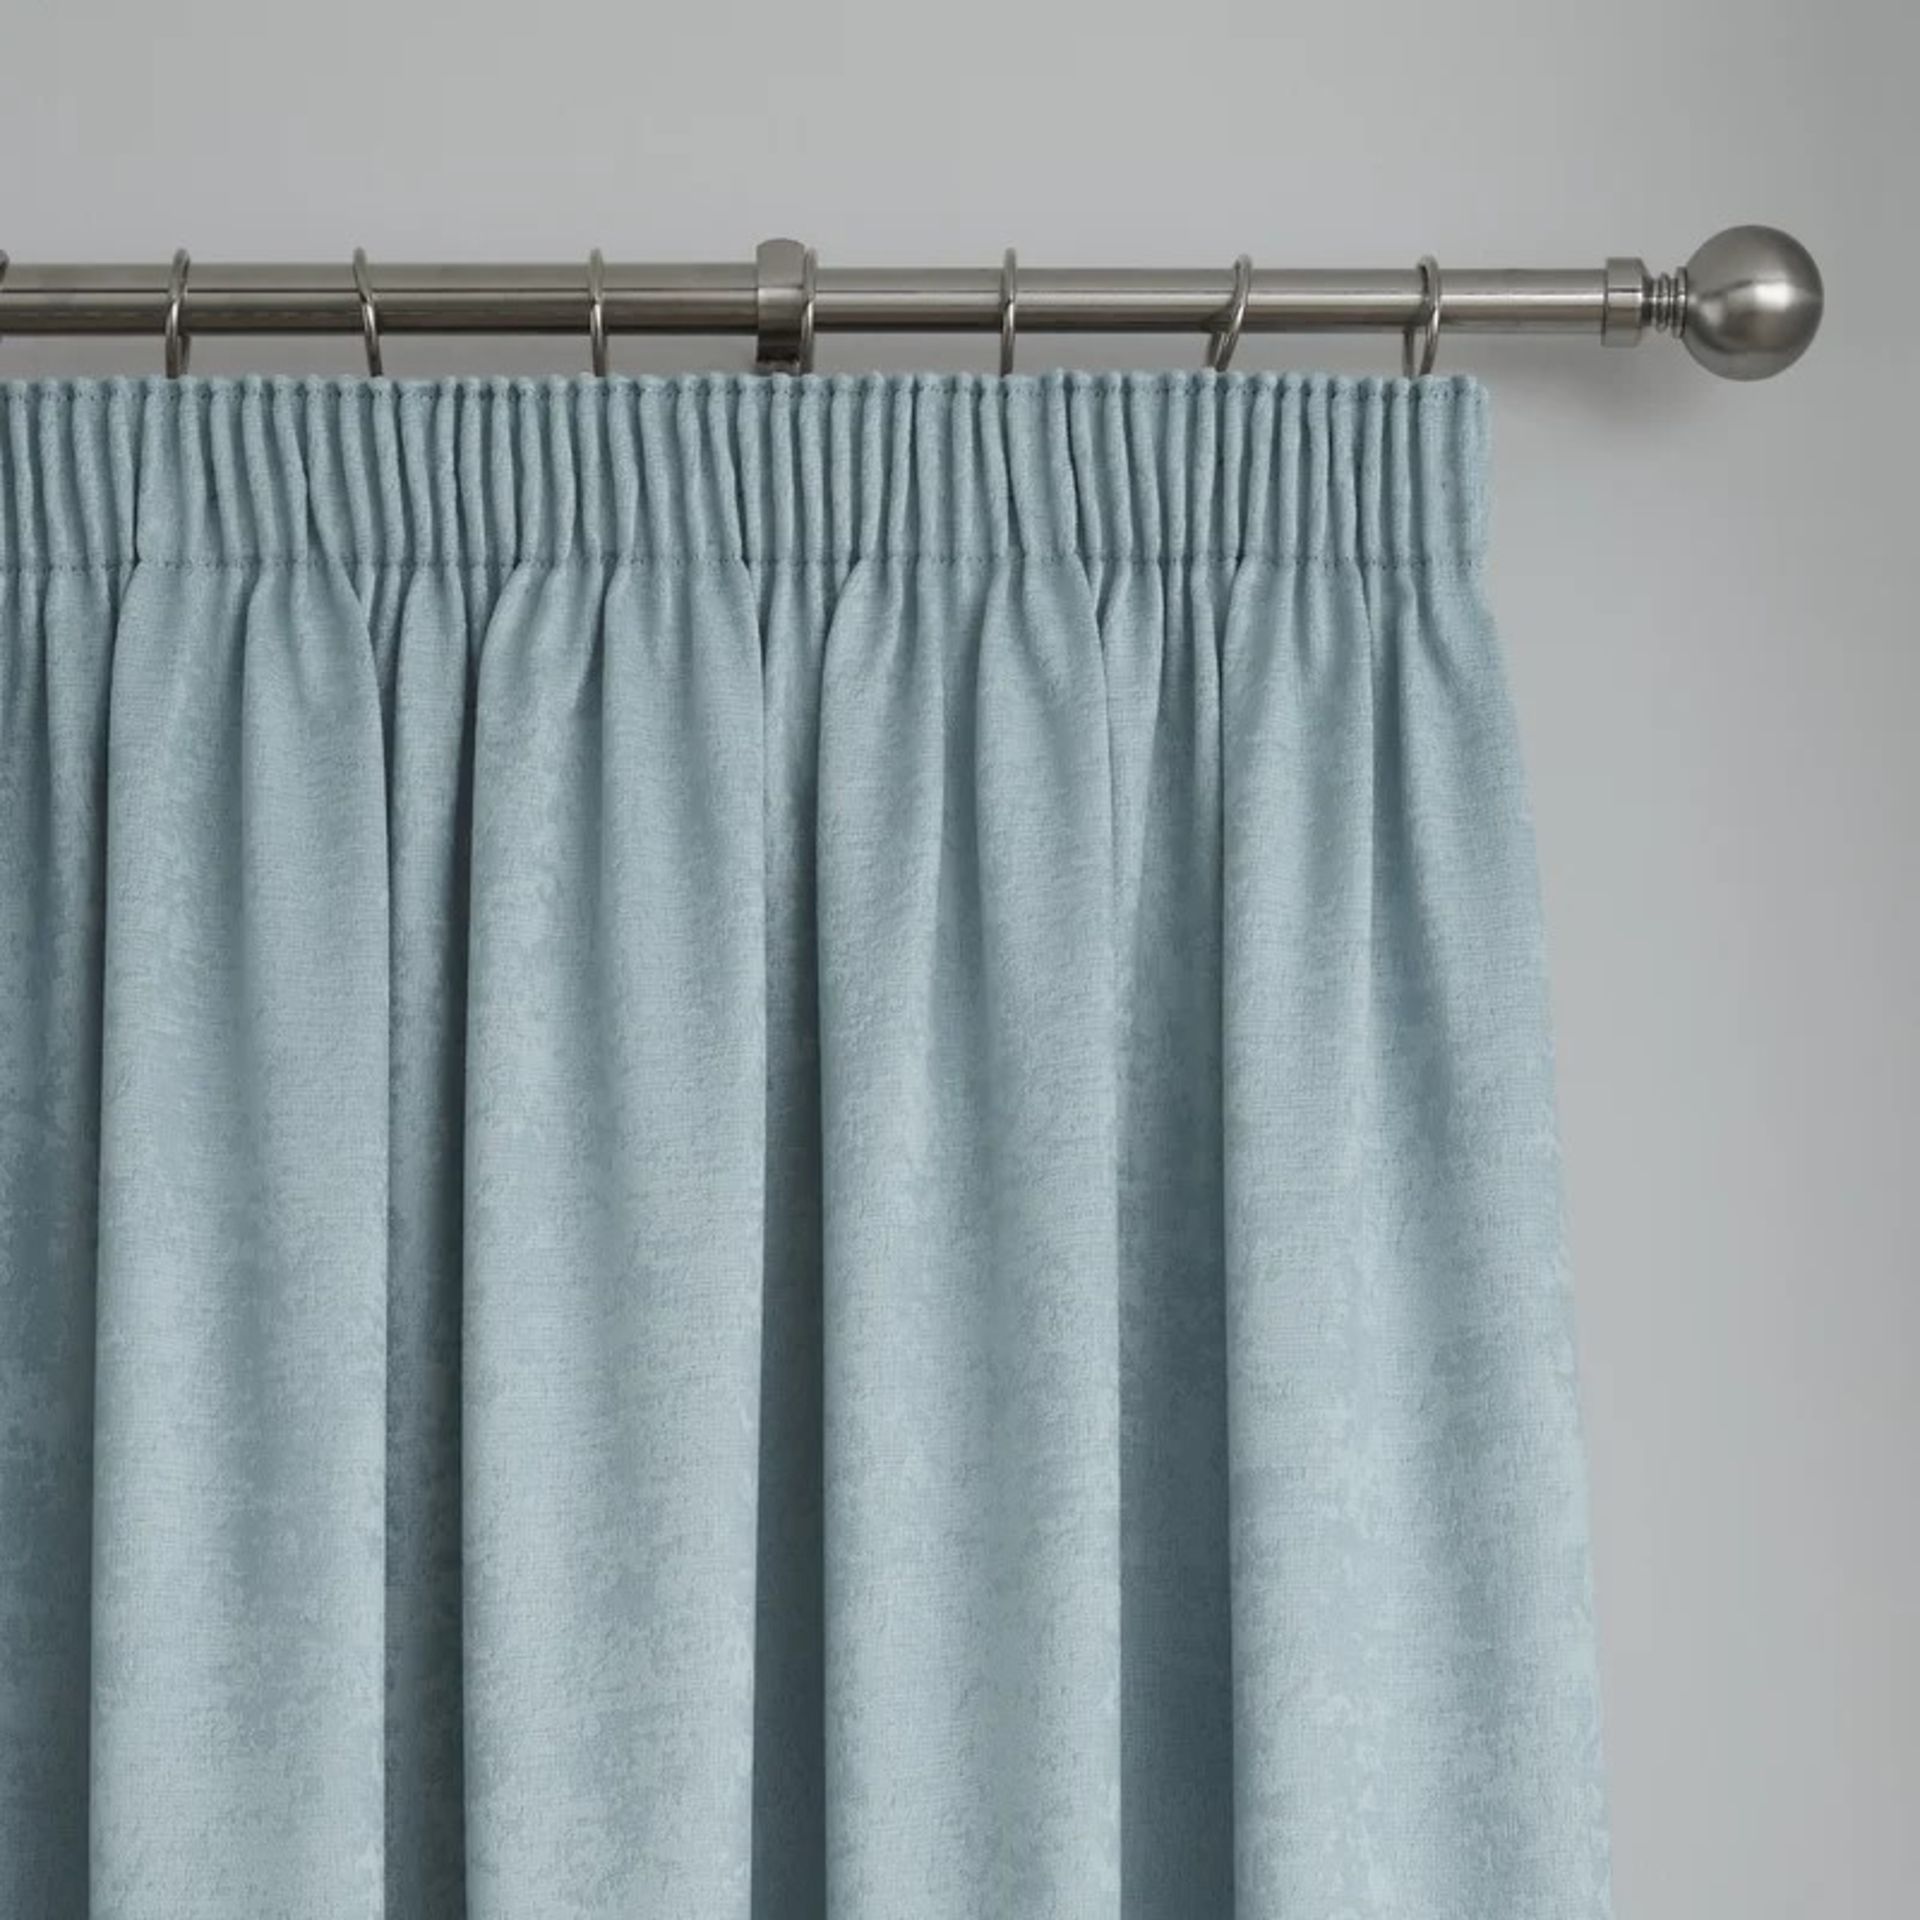 RRP £51.99 - Carianna Pencil Pleat Room Darkening Curtains (Set of 2) - Image 4 of 4